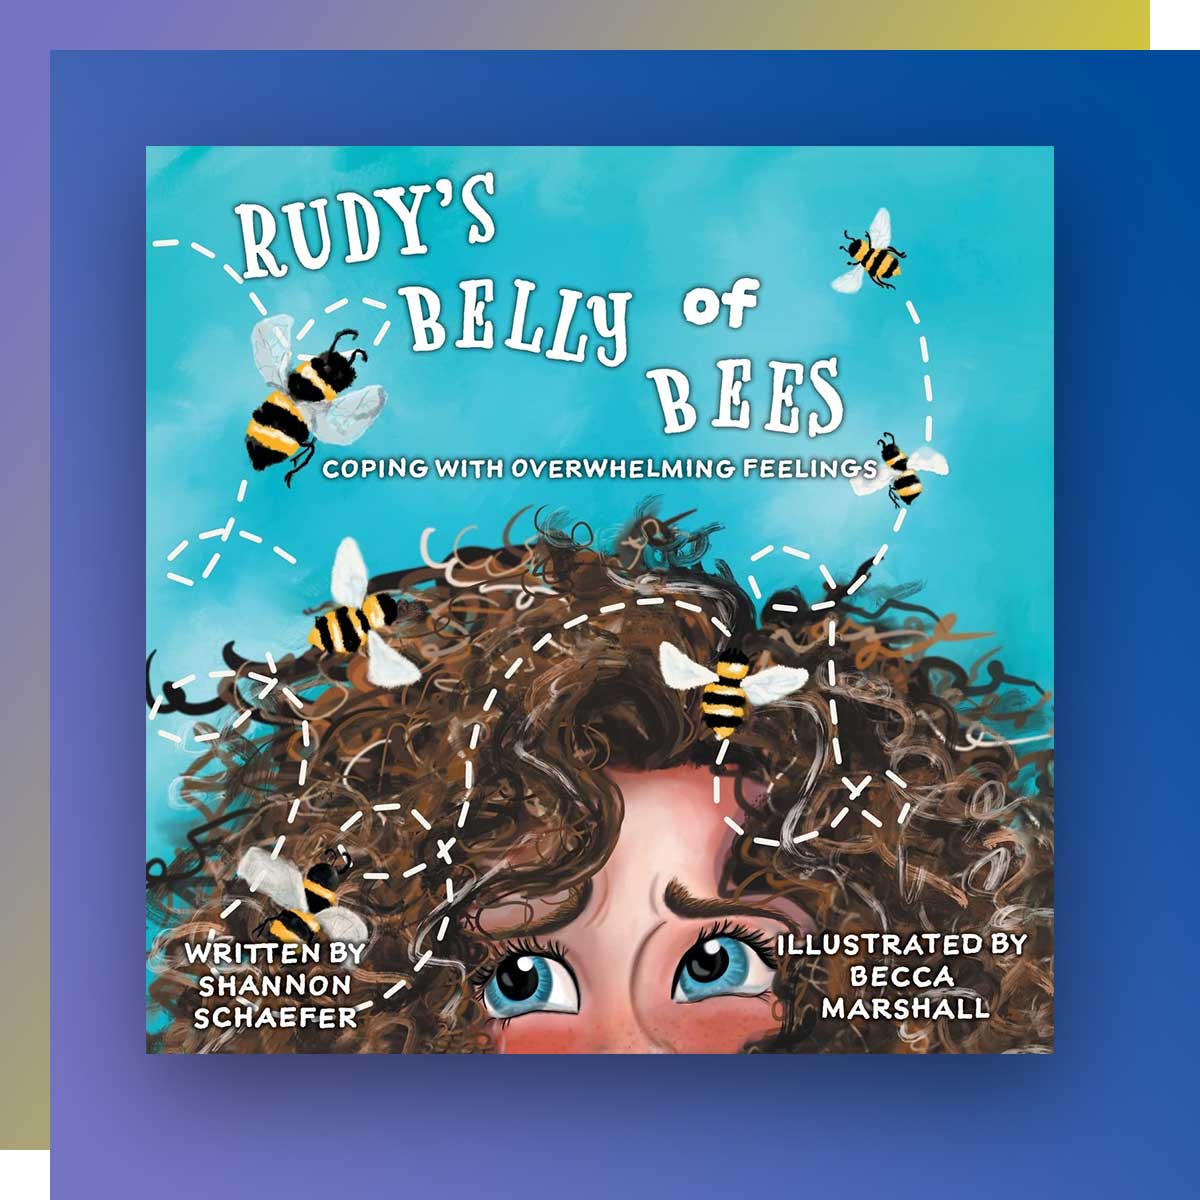 Rudy’s Belly of Bees: Coping with Overwhelming Feelings; Author: Shannon Shaefer, Journalism ‘21